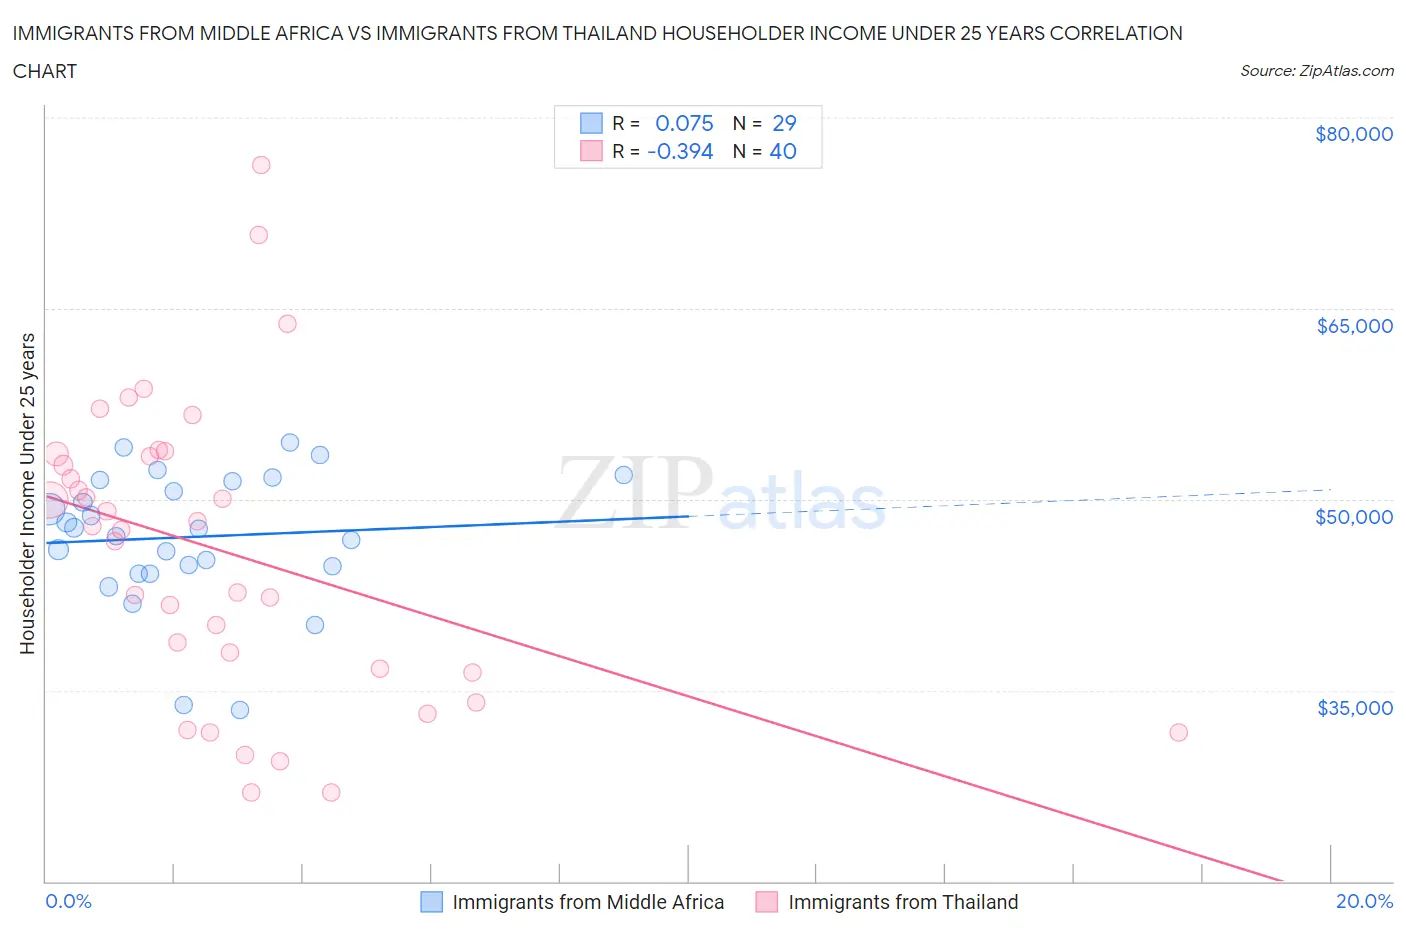 Immigrants from Middle Africa vs Immigrants from Thailand Householder Income Under 25 years